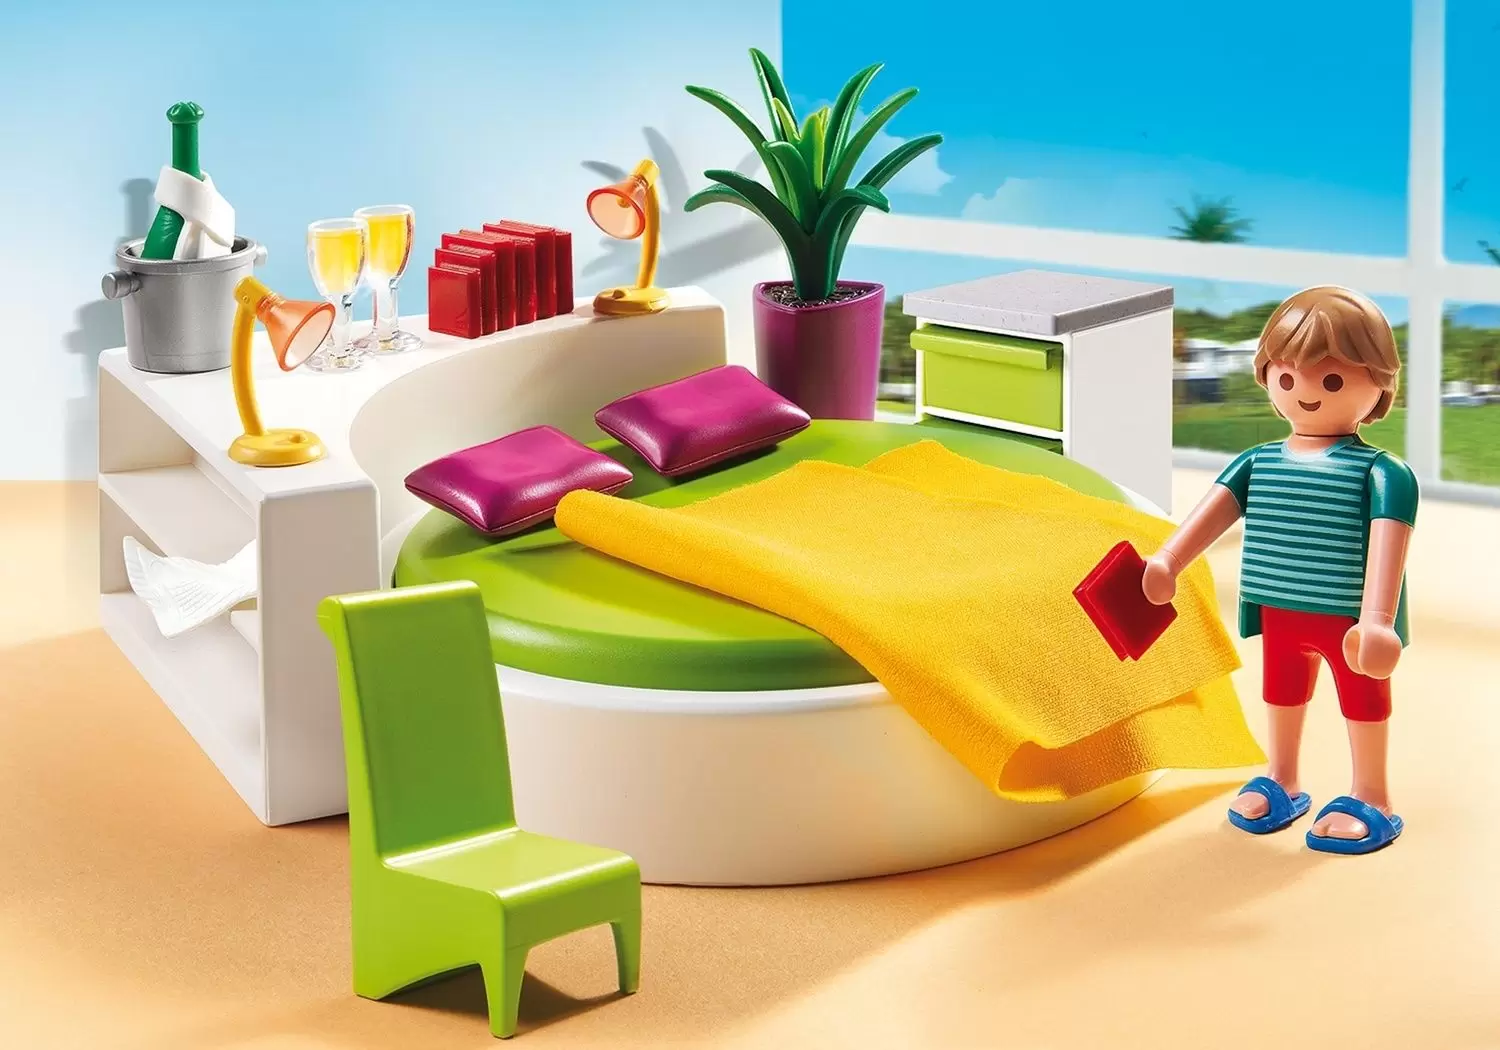 Playmobil Houses and Furniture - Modern Bedroom